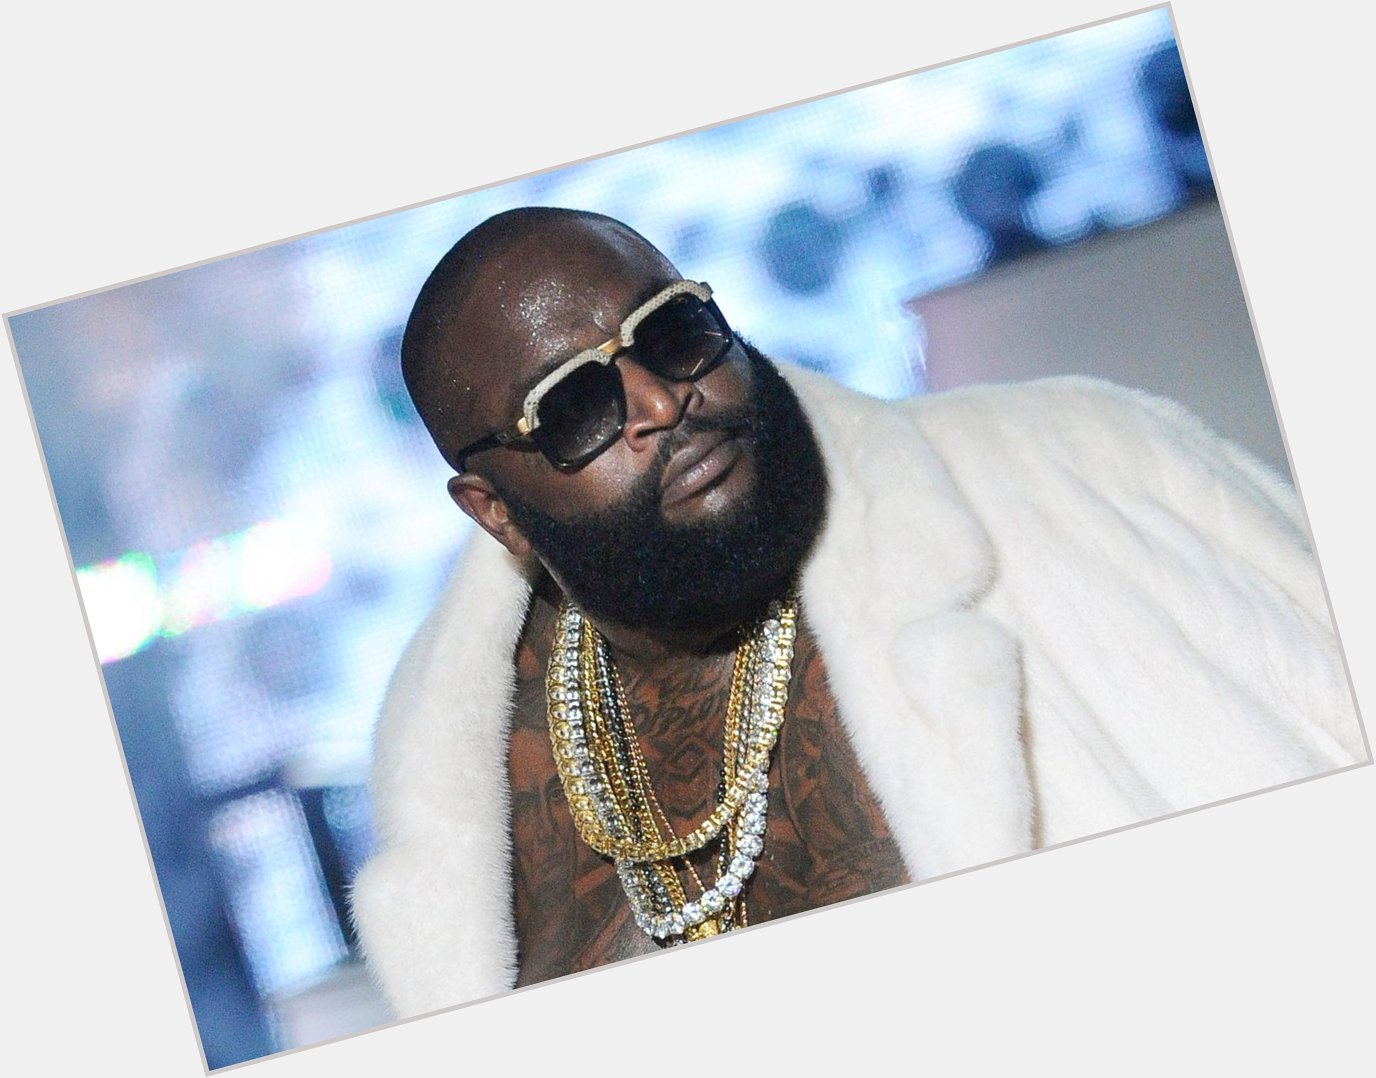 Happy Birthday to Rick Ross, who turns 39 today! 